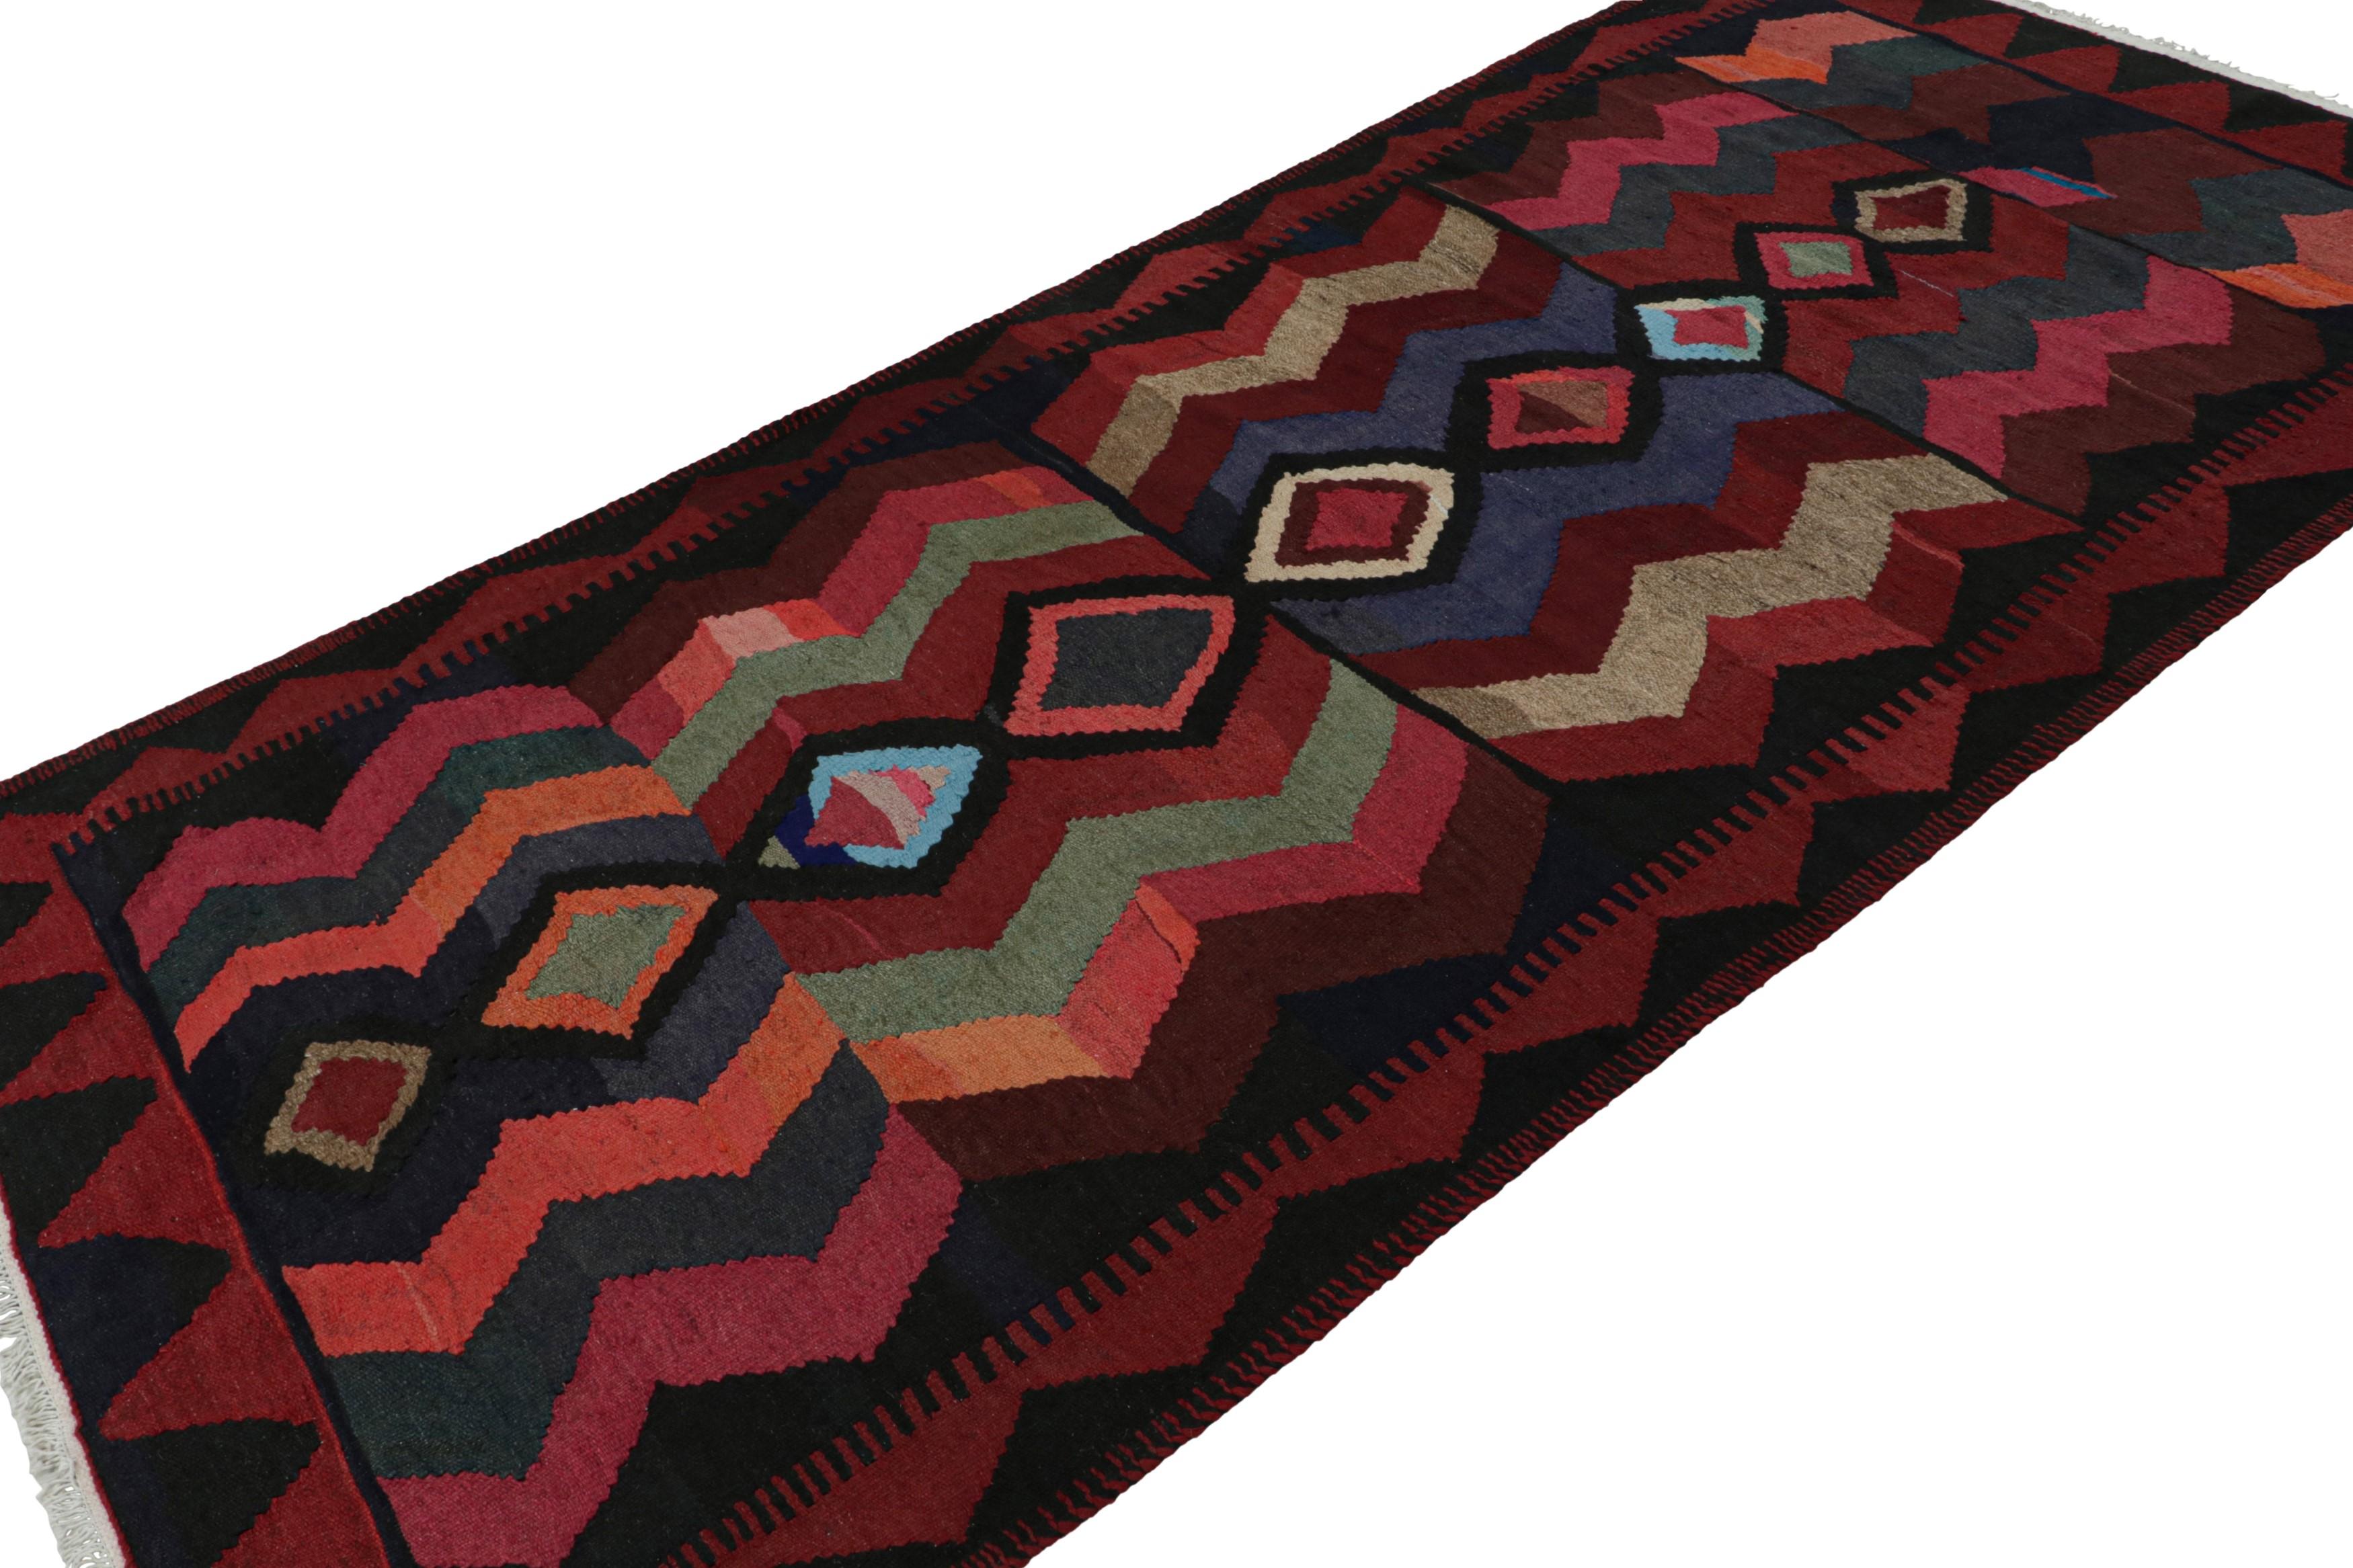 Handwoven in wool circa 1950-1960, this 5x9 vintage Afghan kilim is a new curation from Rug & Kilim’s collection. 

On the Design:

Specifically believed to be coming from tribal weavers, this 5x9 flatweave boasts a rich personality with traditional